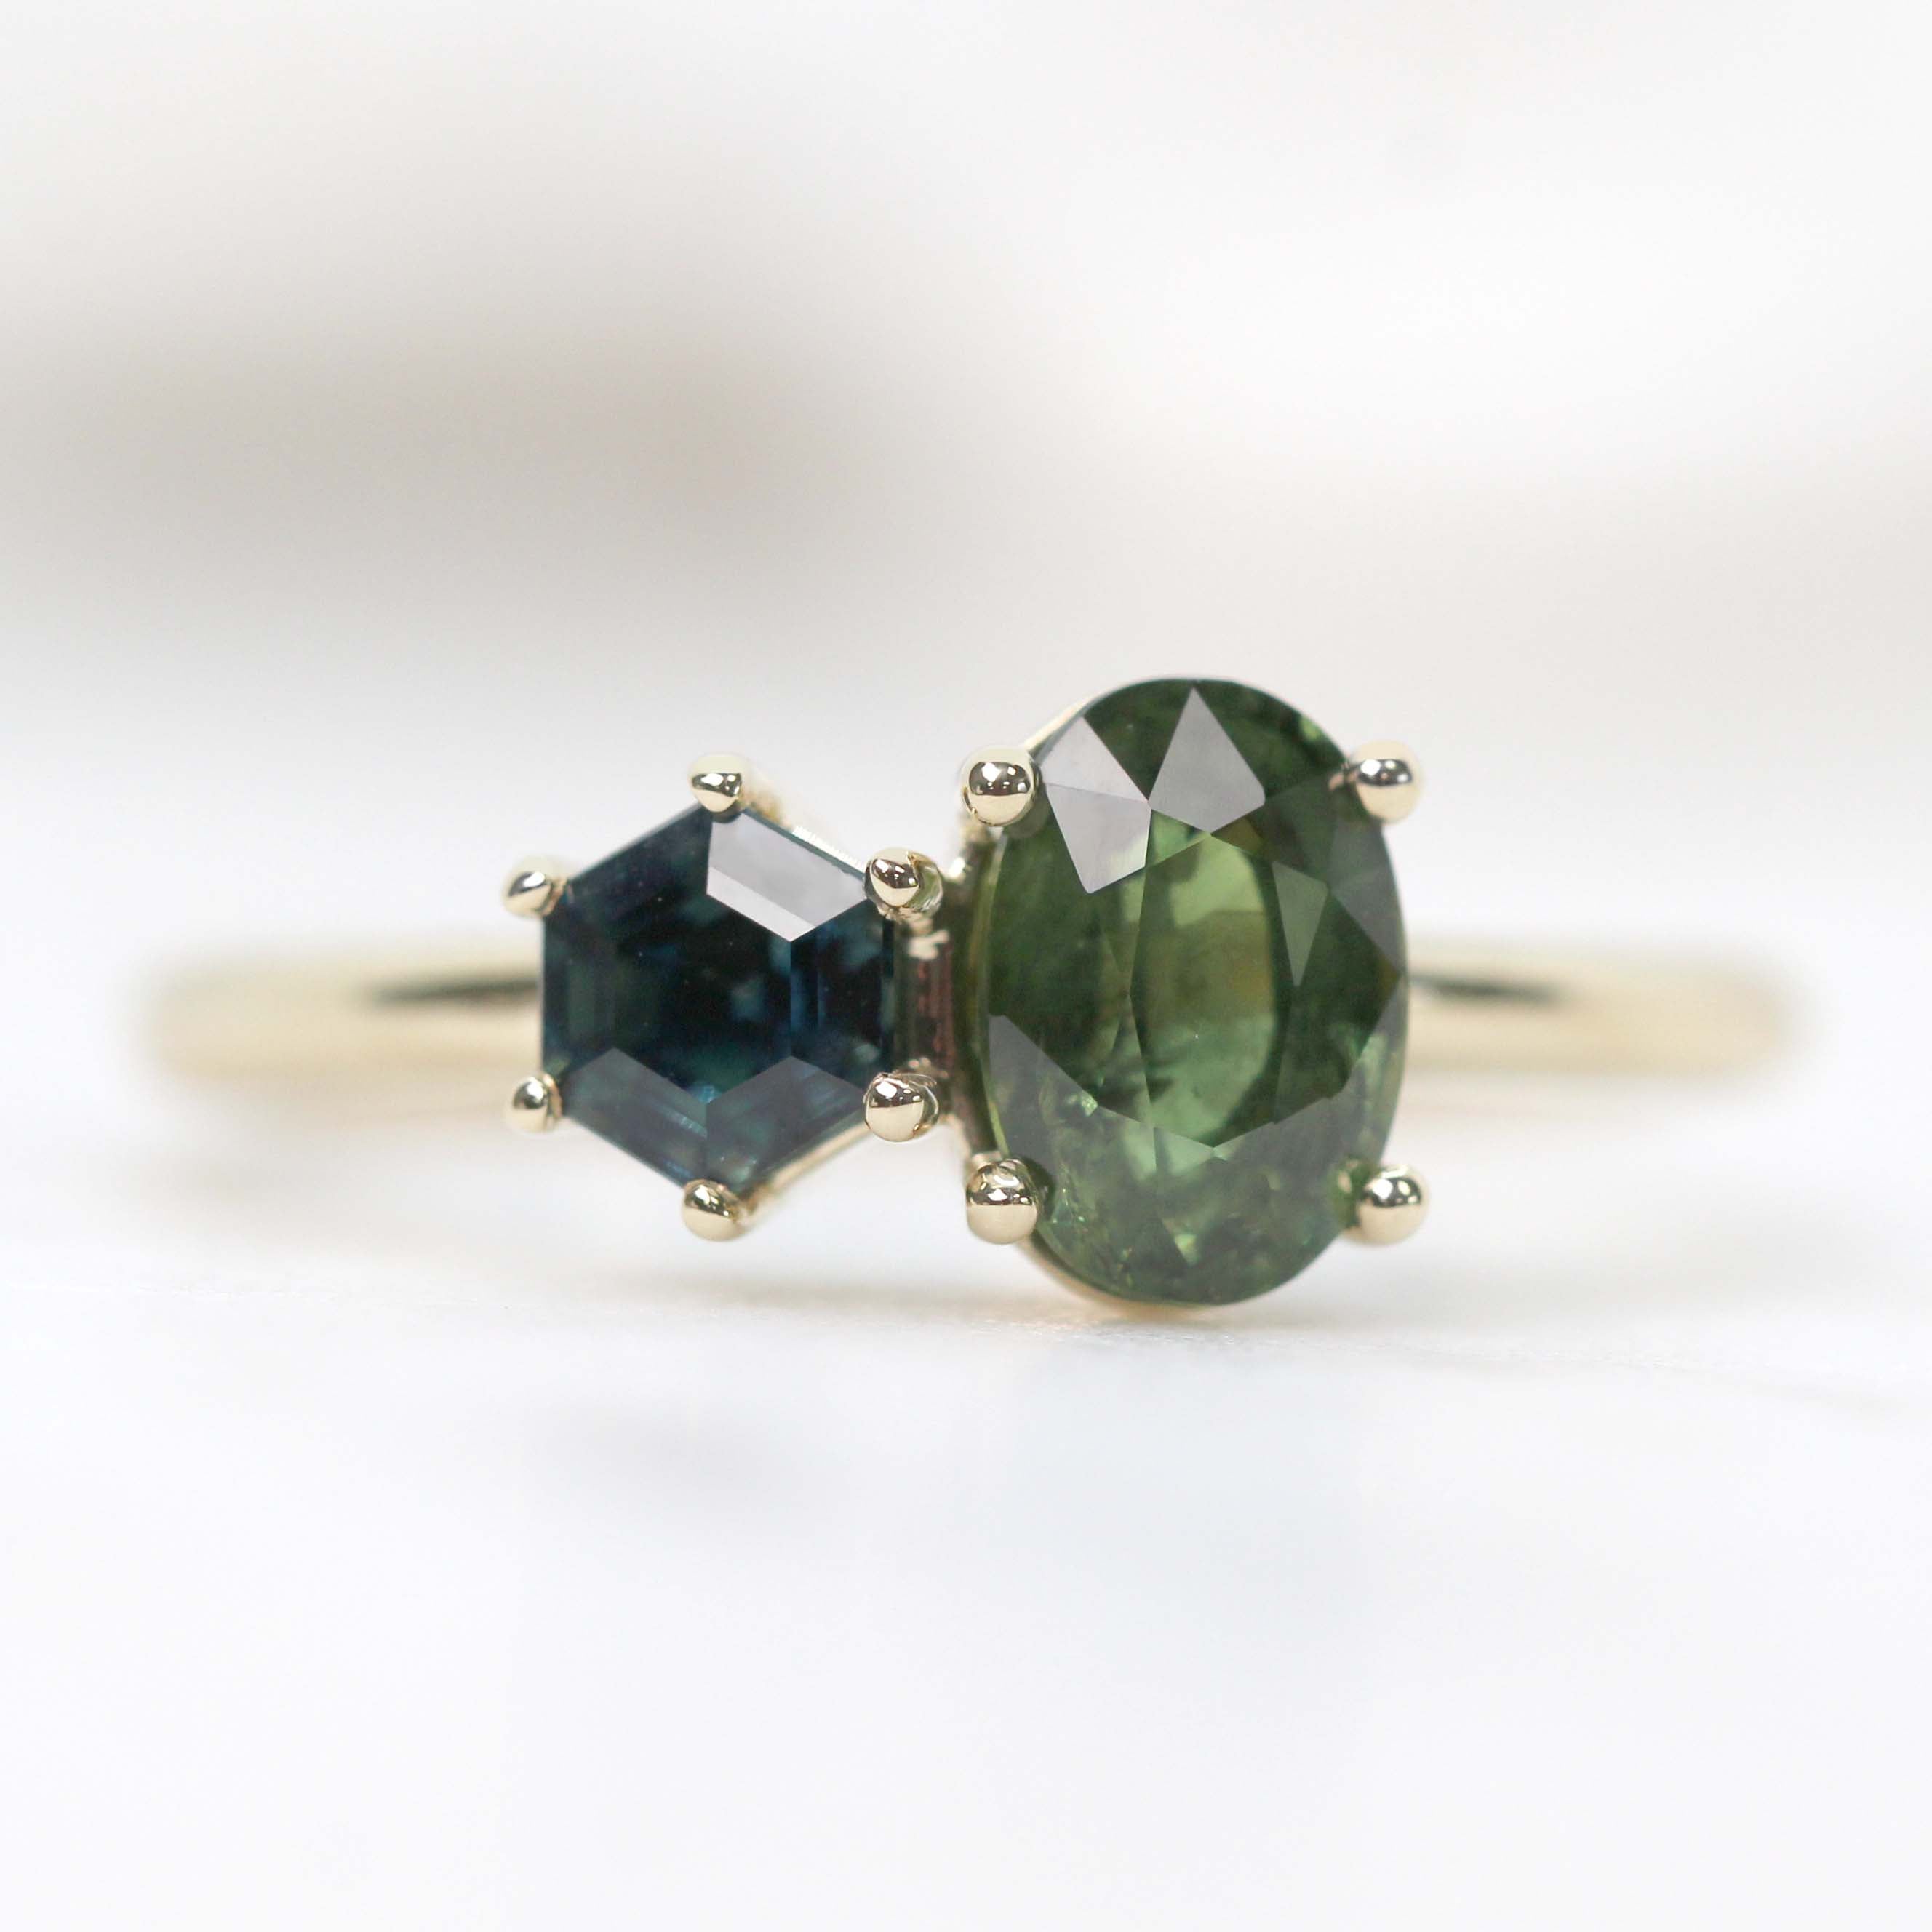 Fleur Toi et Moi Emerald and Oval Gemstone Ring